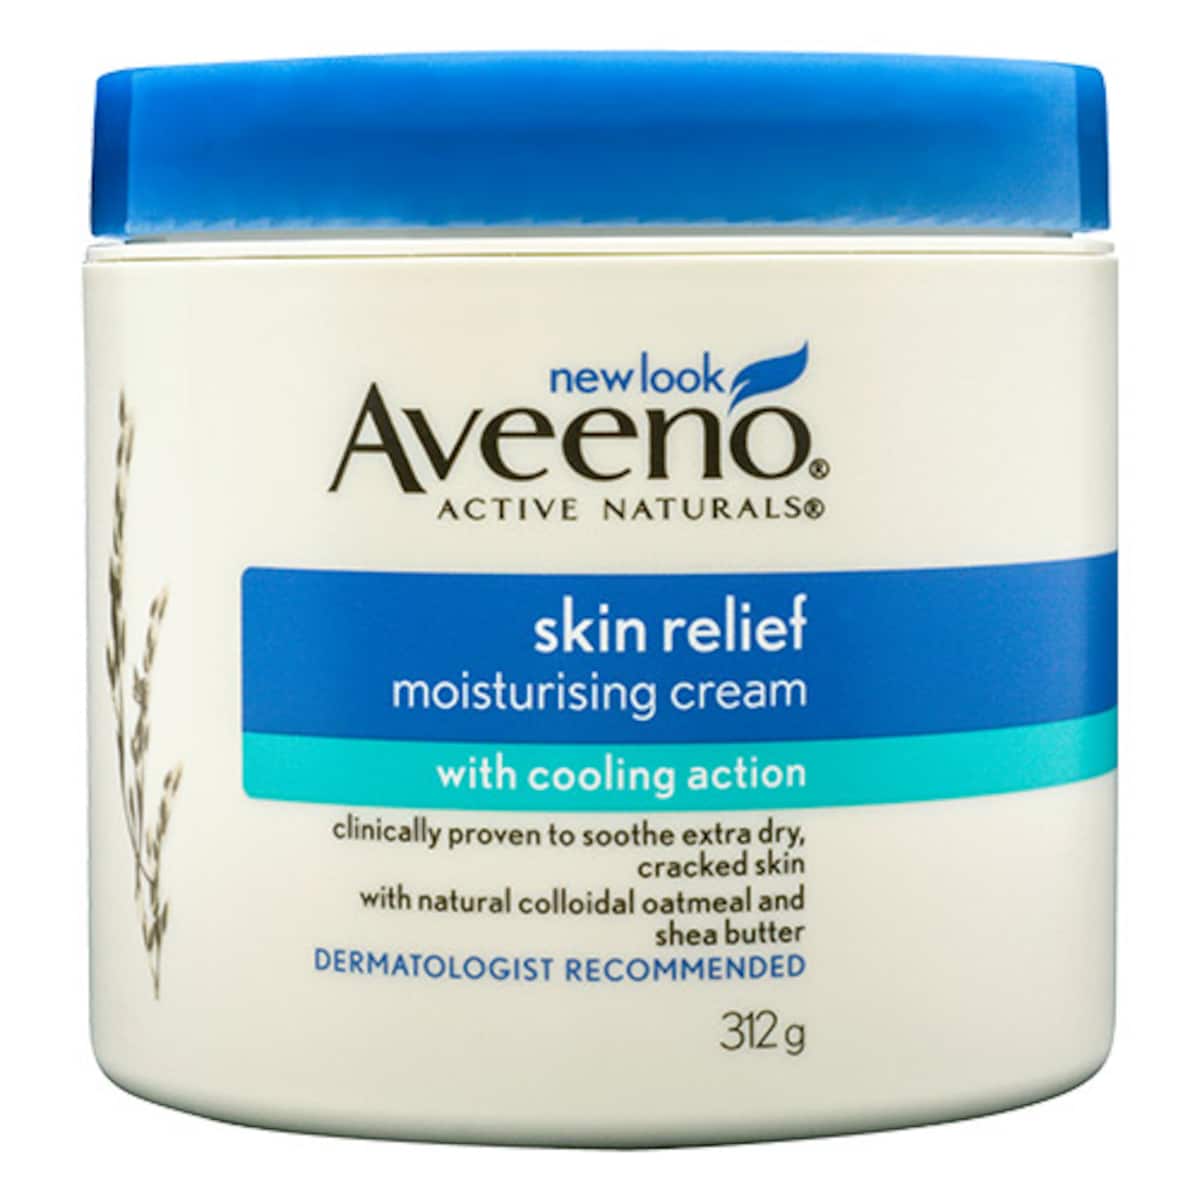 Aveeno Active Naturals Skin Relief Moisturising Cream with Cooling Action 312g